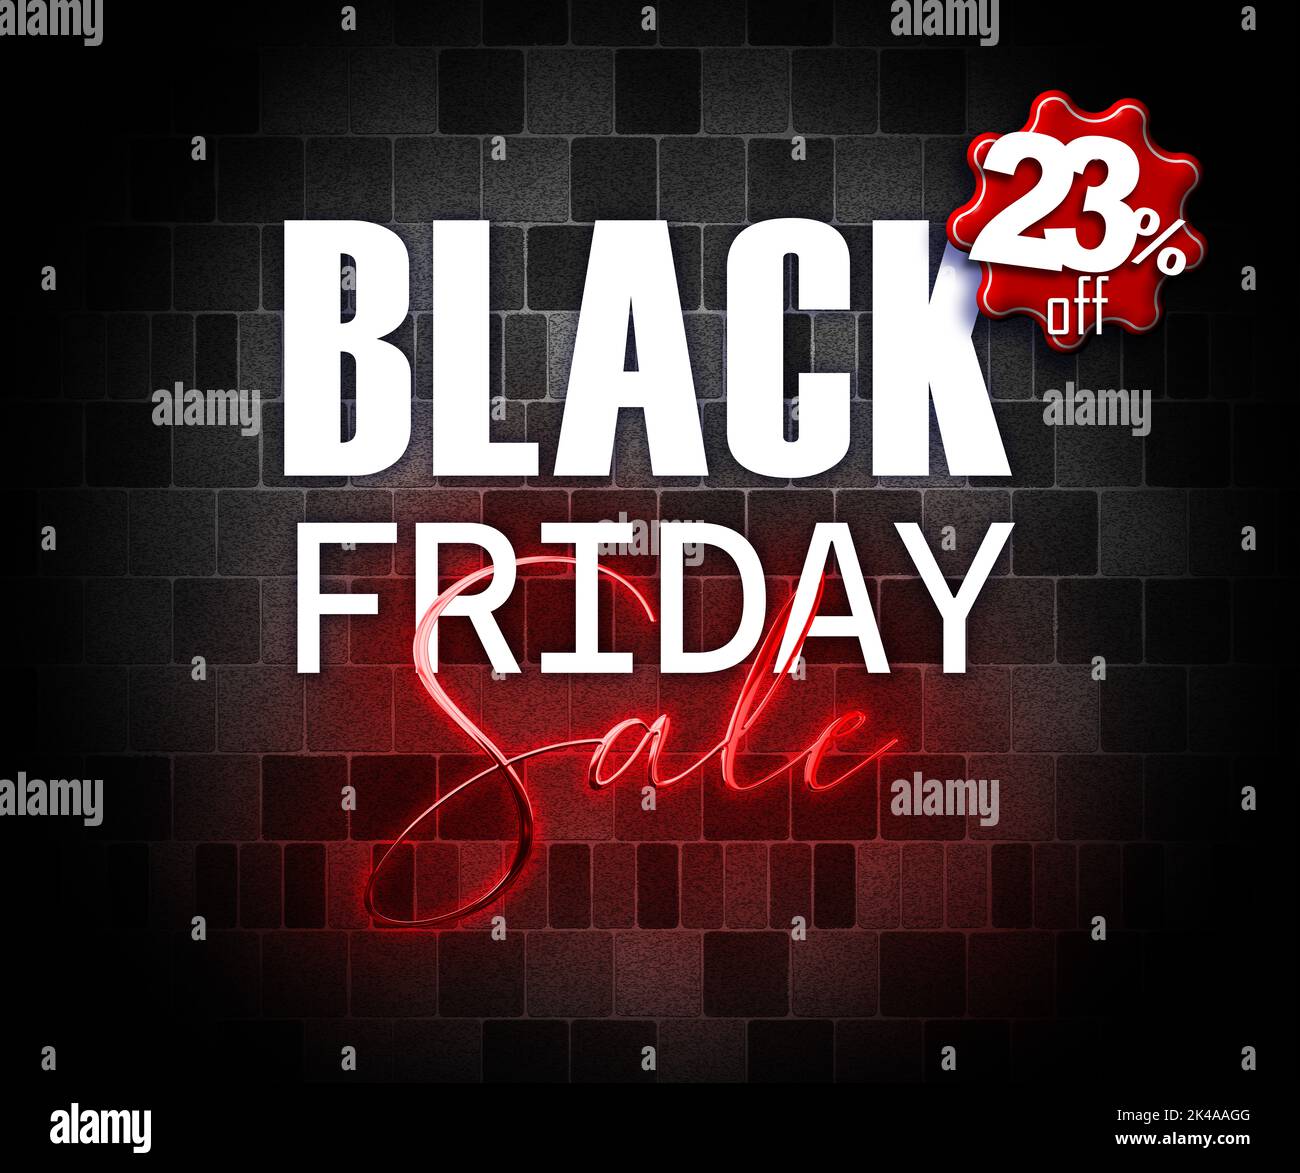 illustration with 3d elements black friday promotion banner 23 percent off sales increase Stock Photo